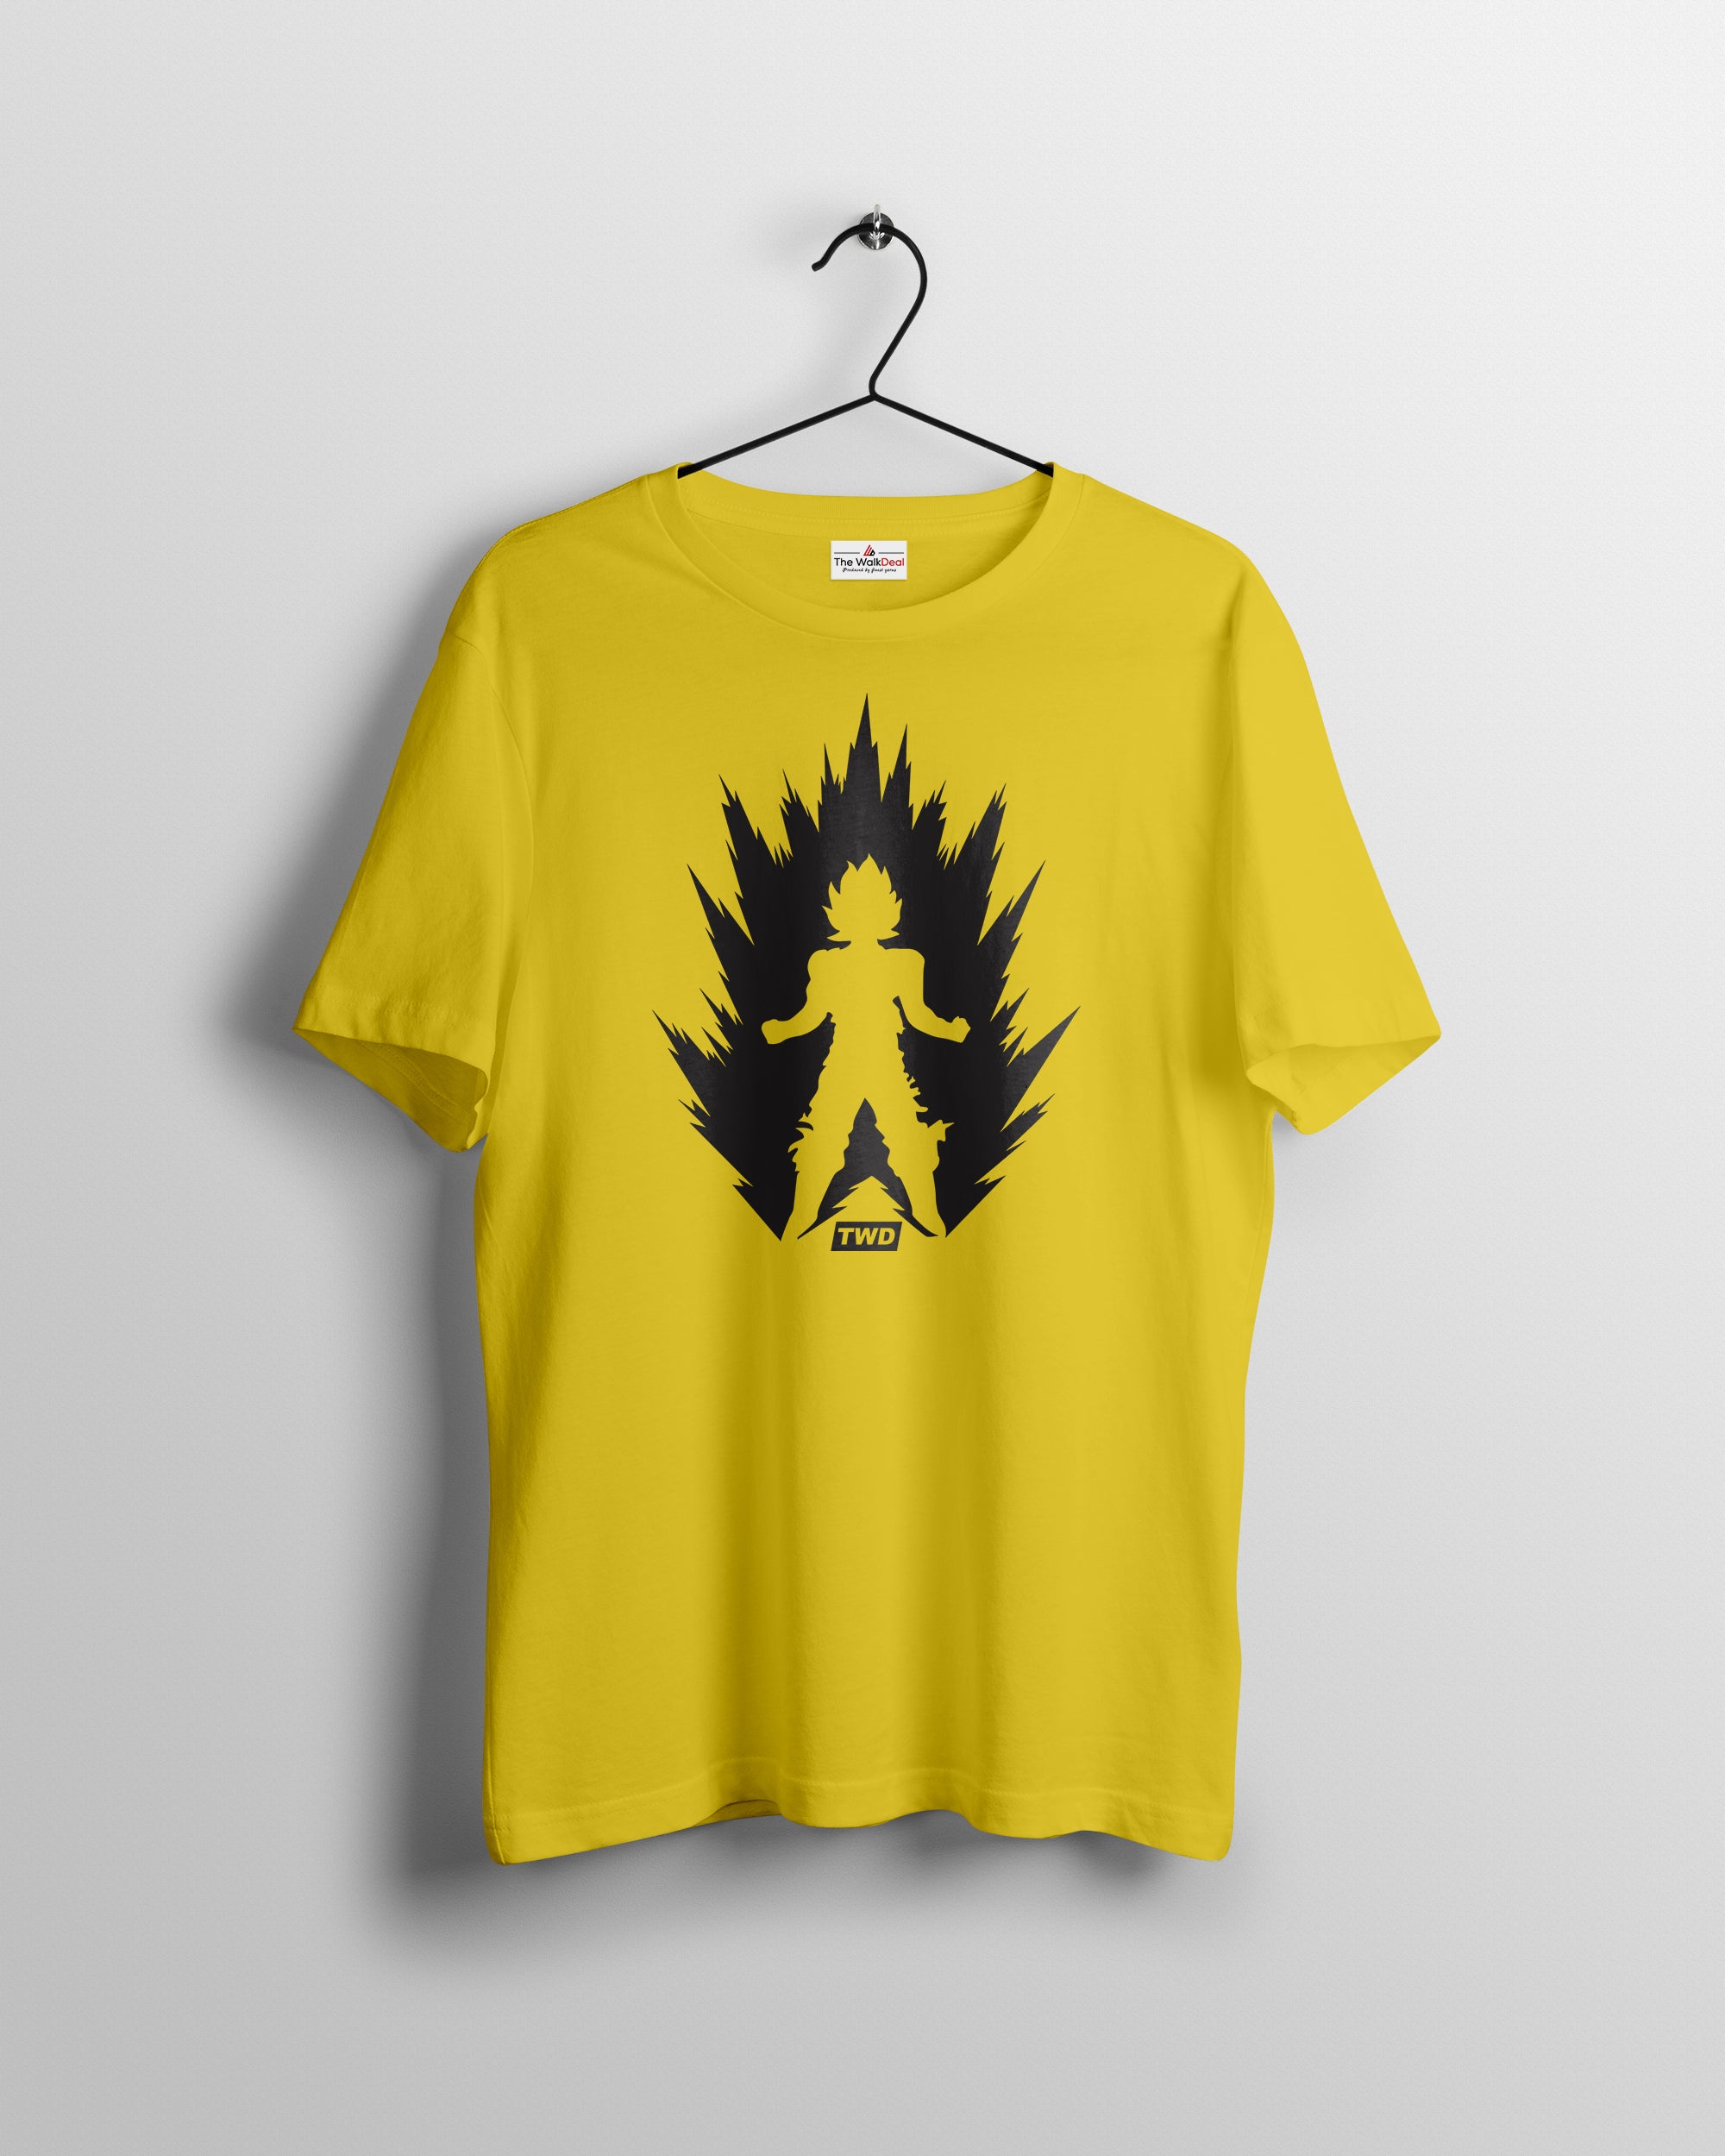 Z Power T-Shirts For Men || Yellow || Stylish Tshirts || 100% Cotton || Best T-Shirt For Men's